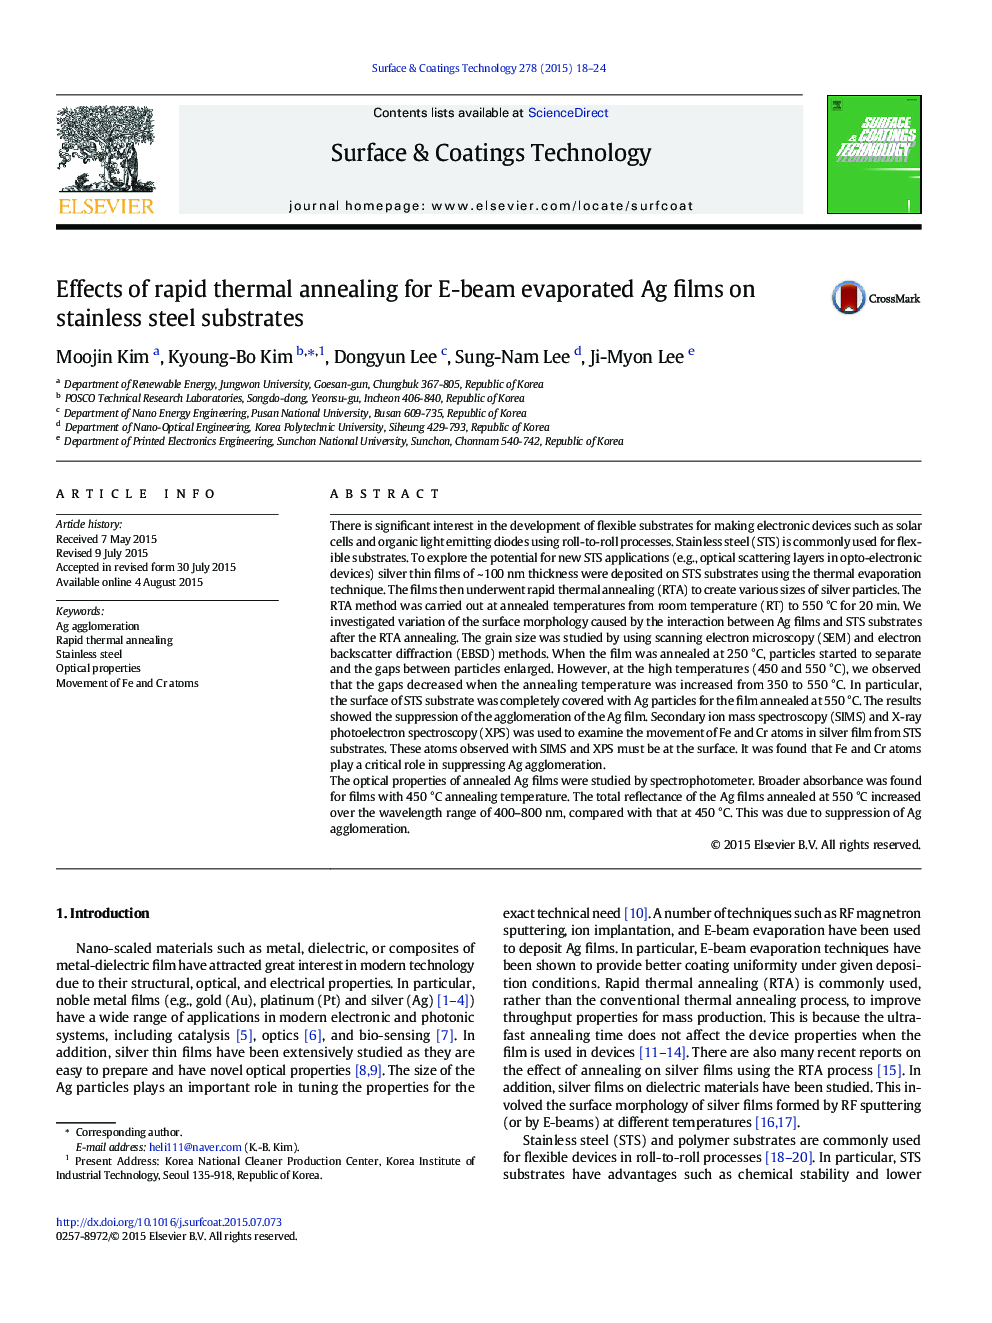 Effects of rapid thermal annealing for E-beam evaporated Ag films on stainless steel substrates